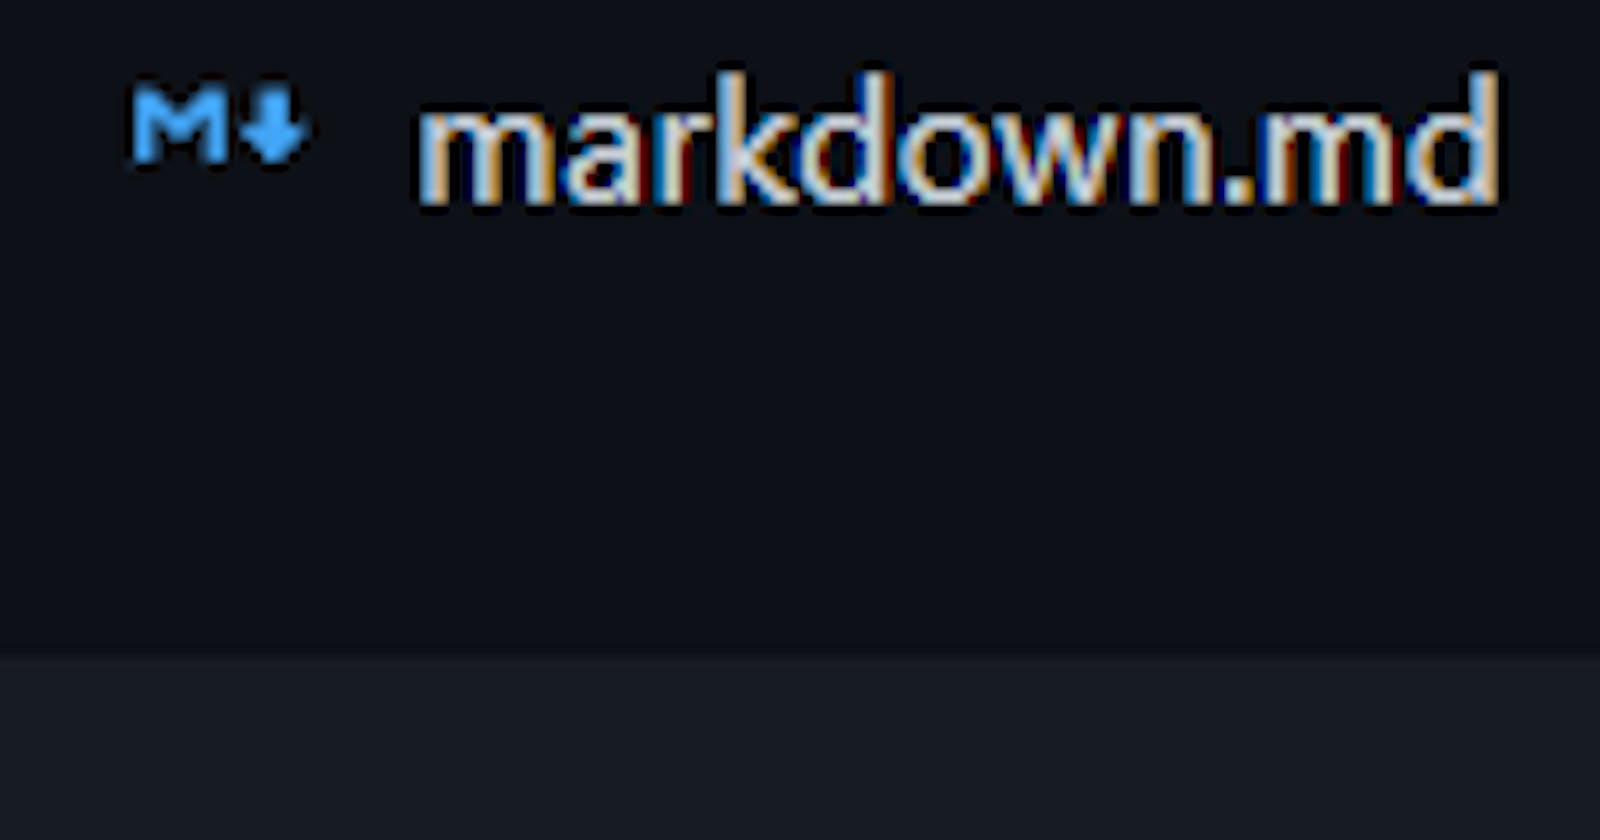 Everything you need to know while writing markdown .md